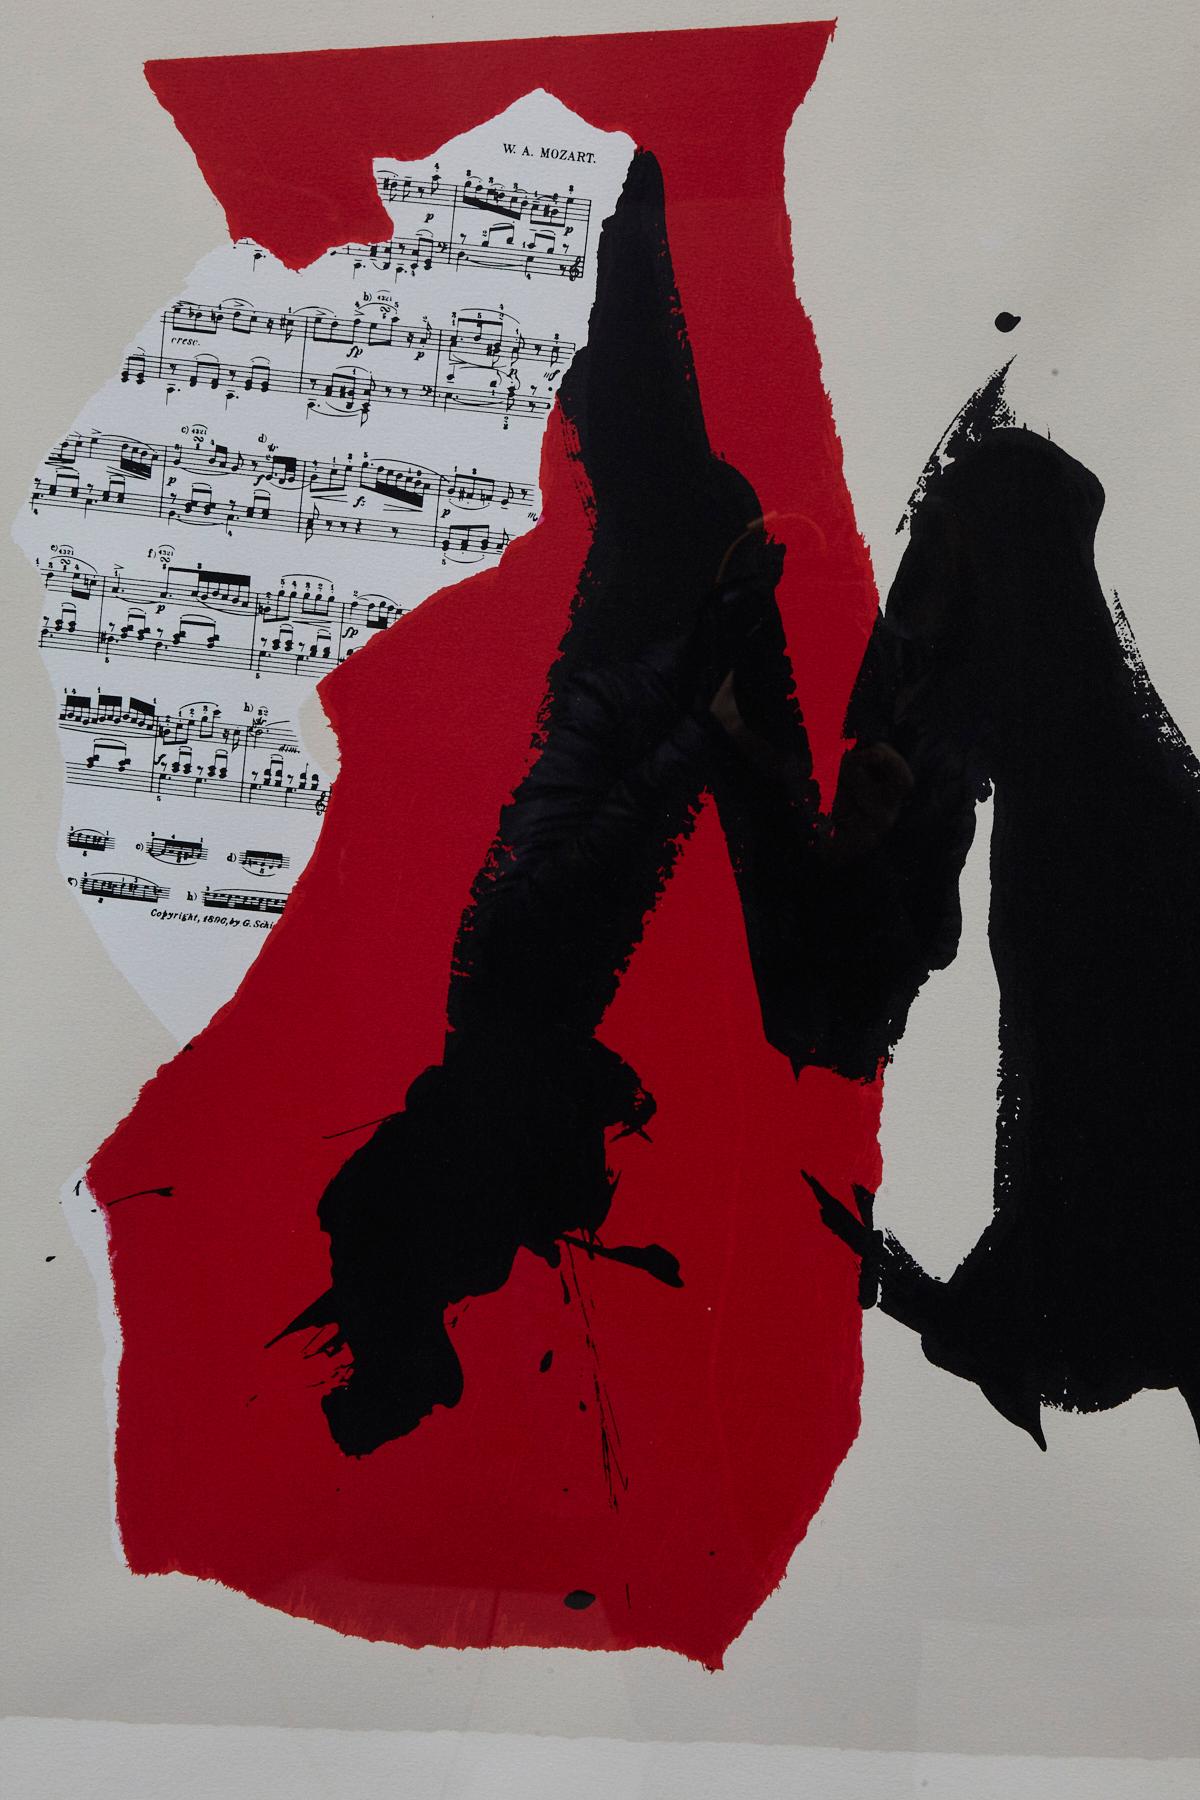 Lincoln Center's Mostly Mozart Festival - 25th Anniversary - Abstract Expressionist Print by Robert Motherwell